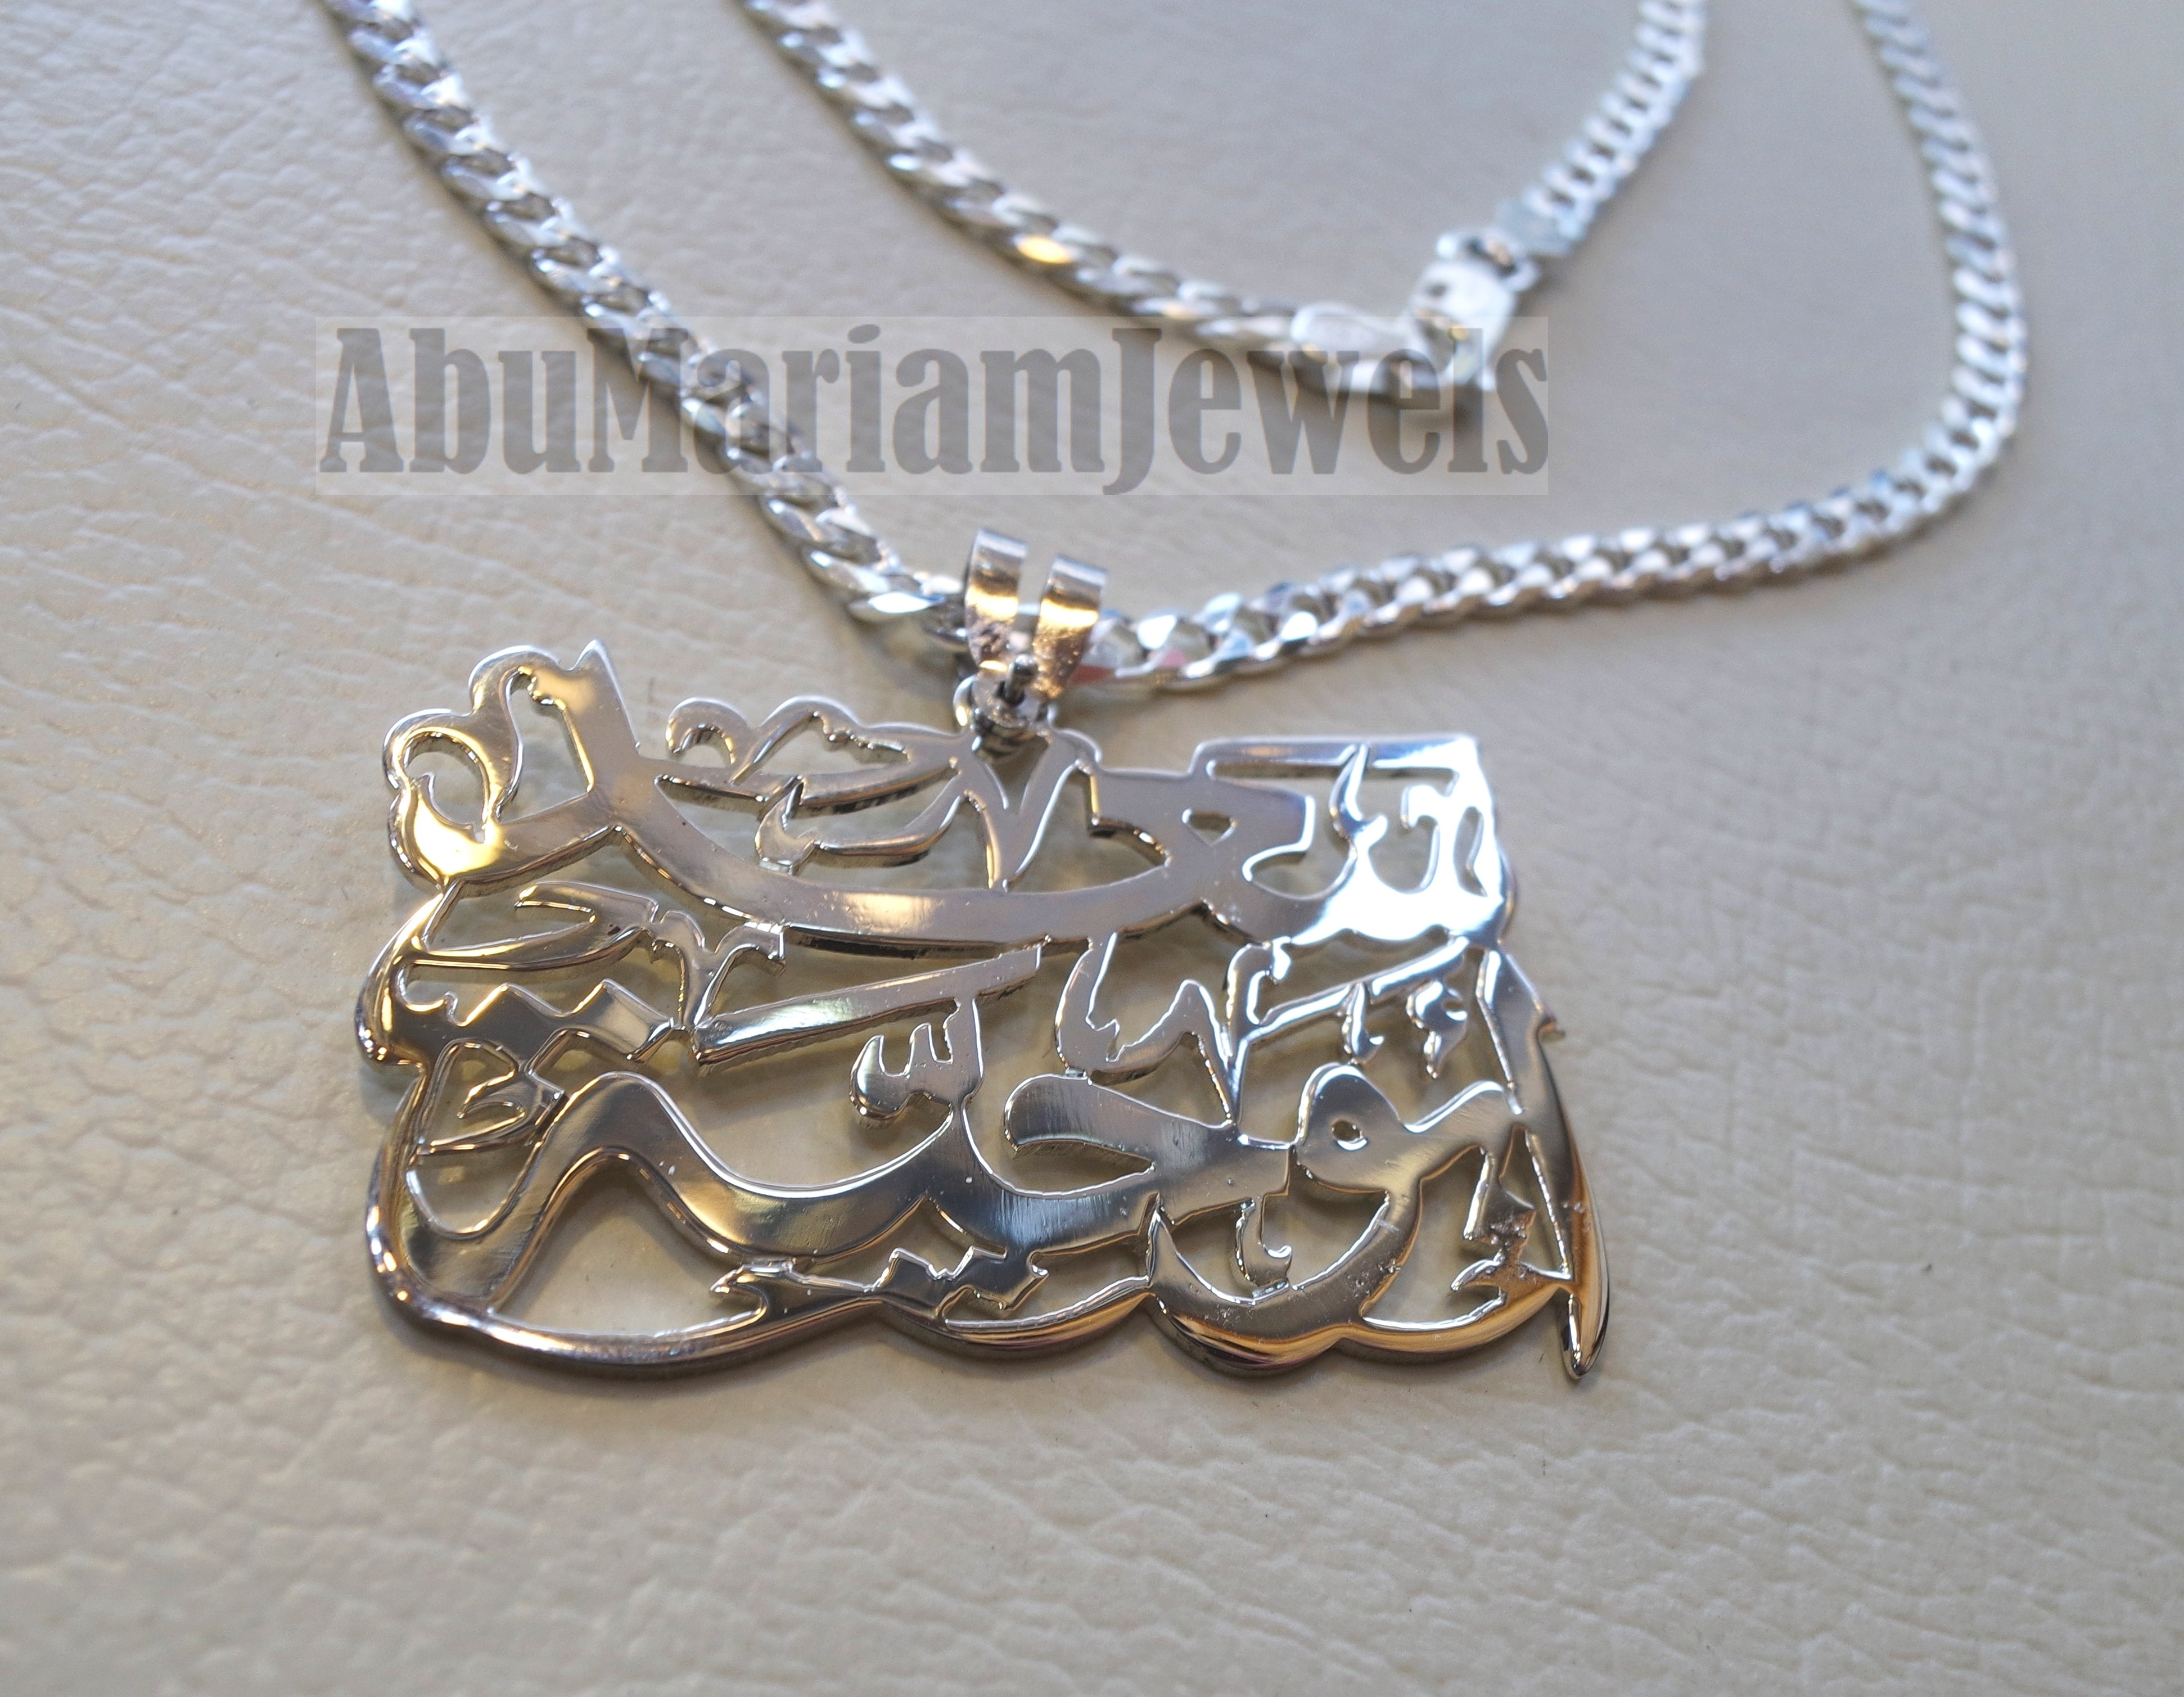 pendant any two names arabic made to order customized name thick chain 2 sterling silver 925 big rectangle square shape تعليقه اسماء عربي